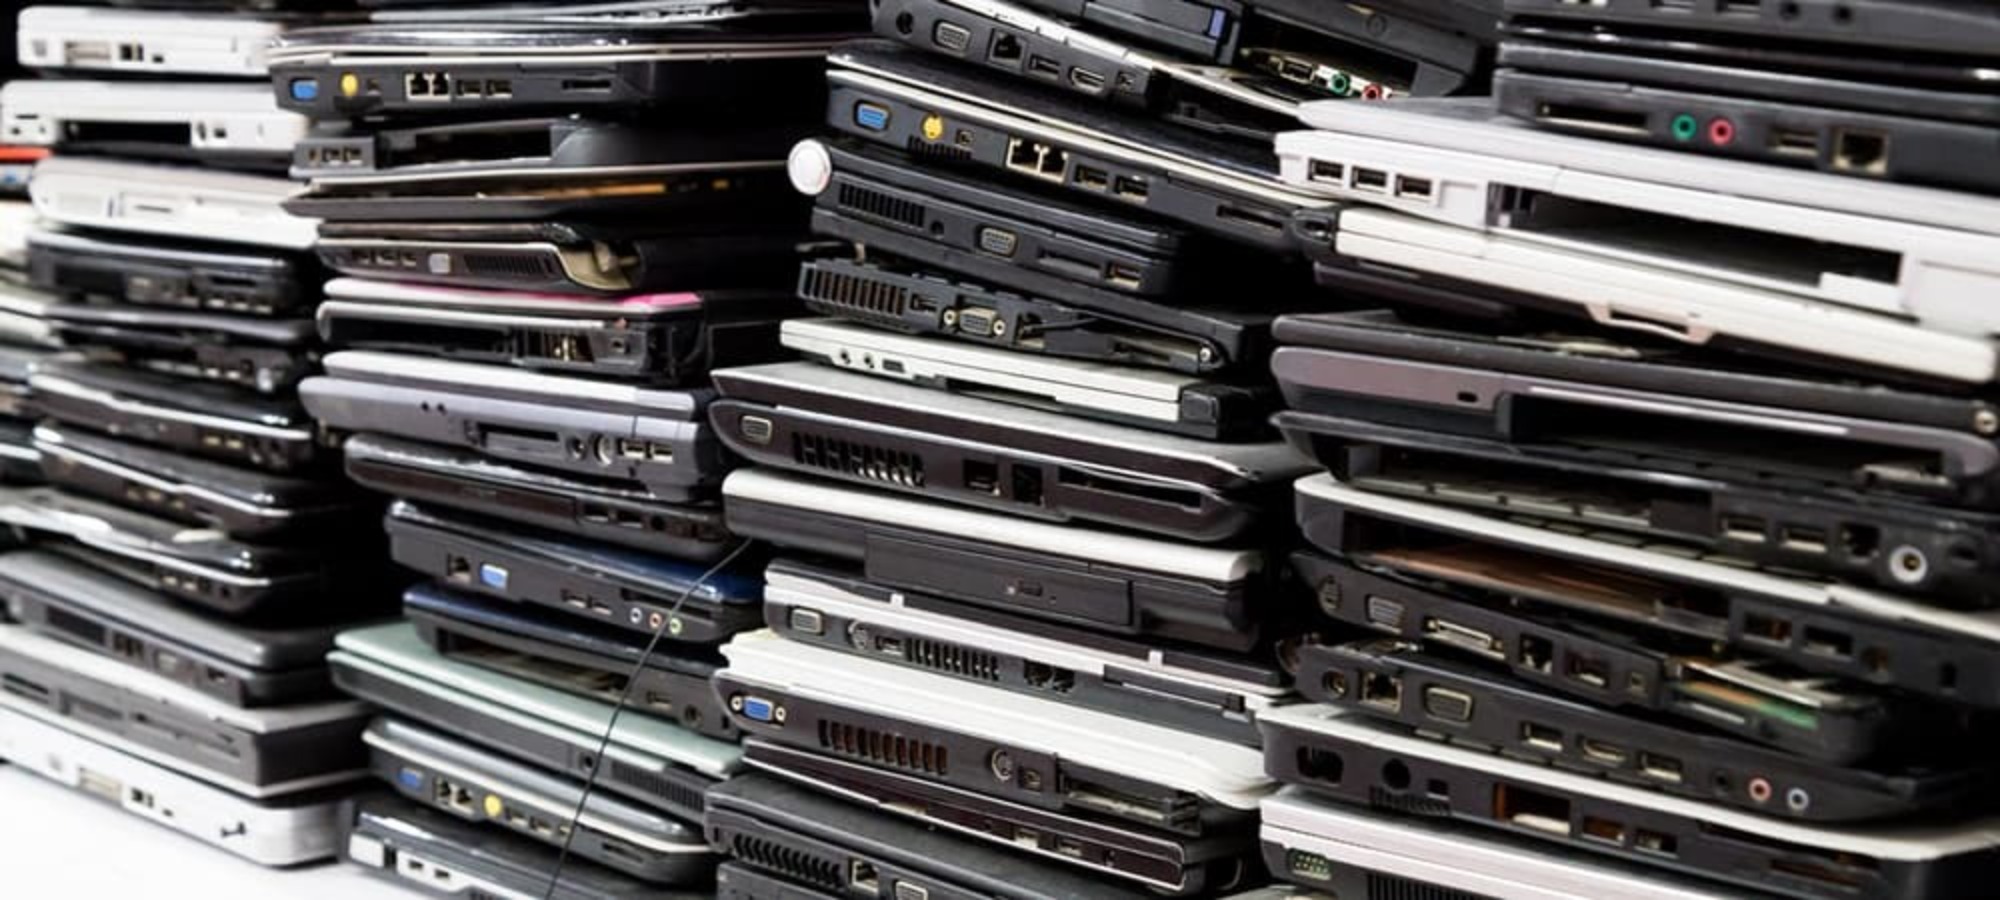 image of dozens of laptops stacked on top of each other